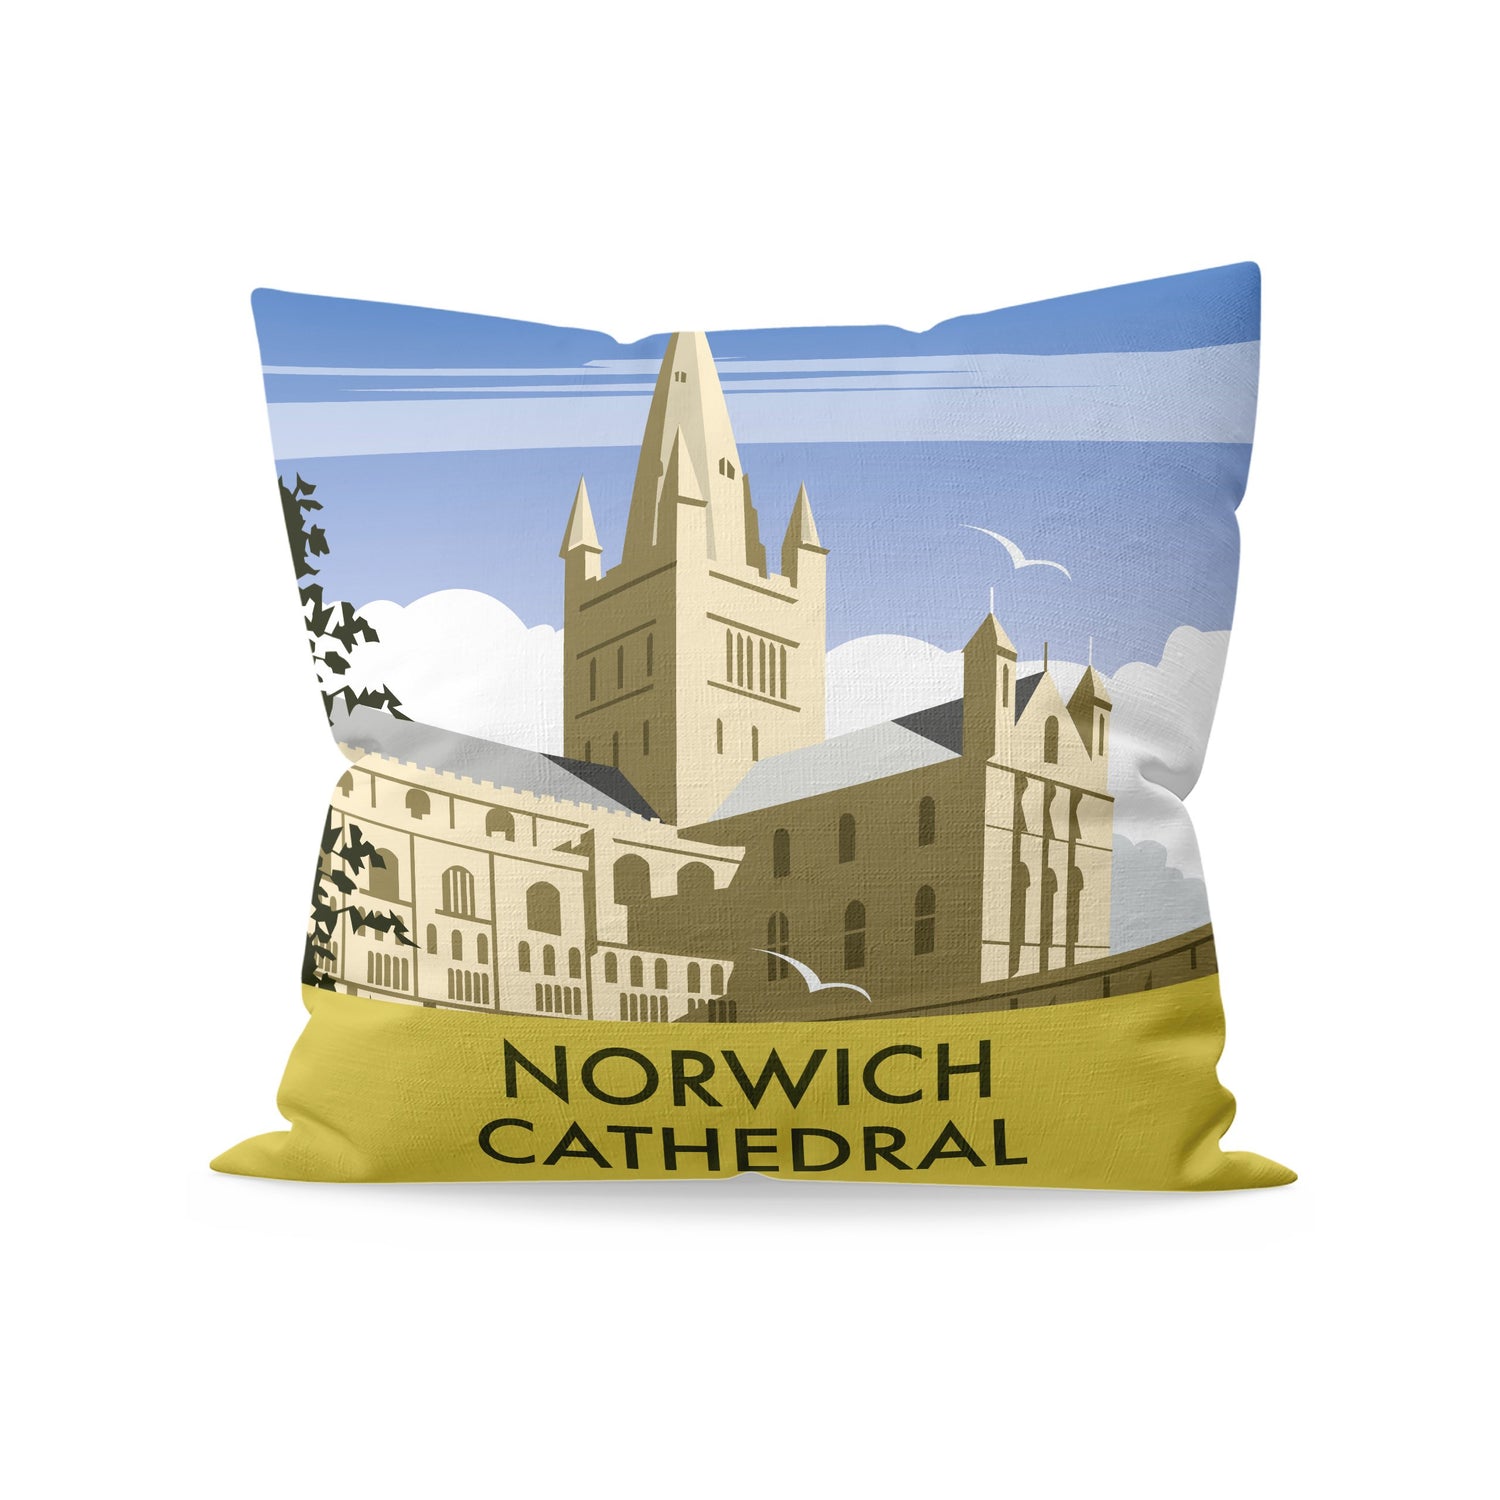 Norwich Cathedral, Norfolk Fibre Filled Cushion